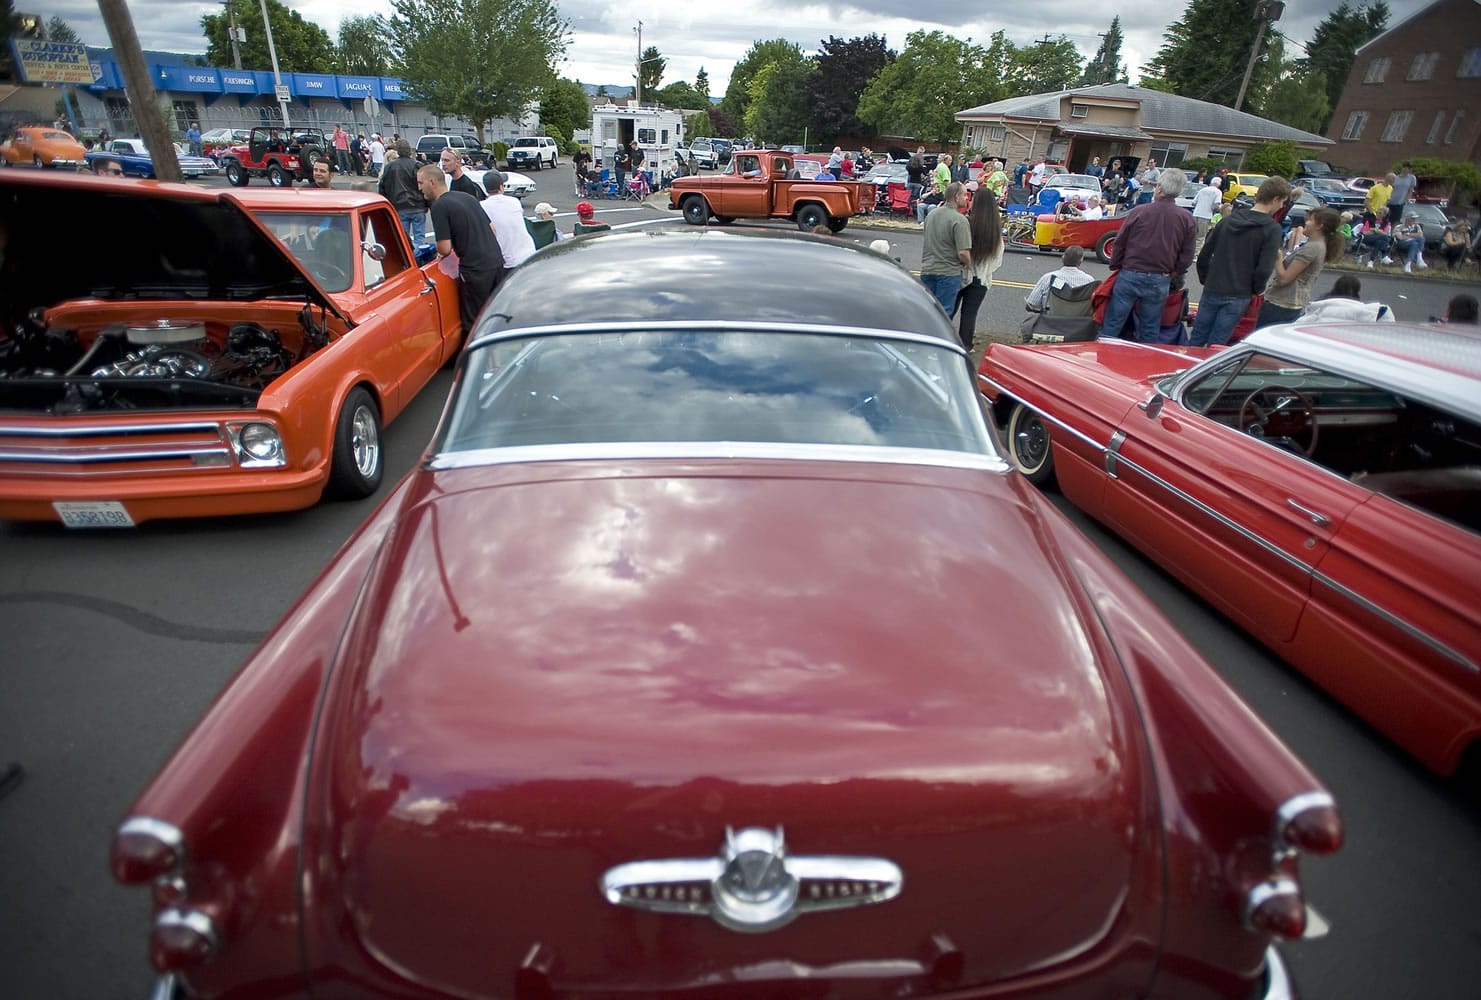 Crowds gather near Dairy Queen on Main Street in Vancouver during the annual Cruisin' the Gut event in 2011.